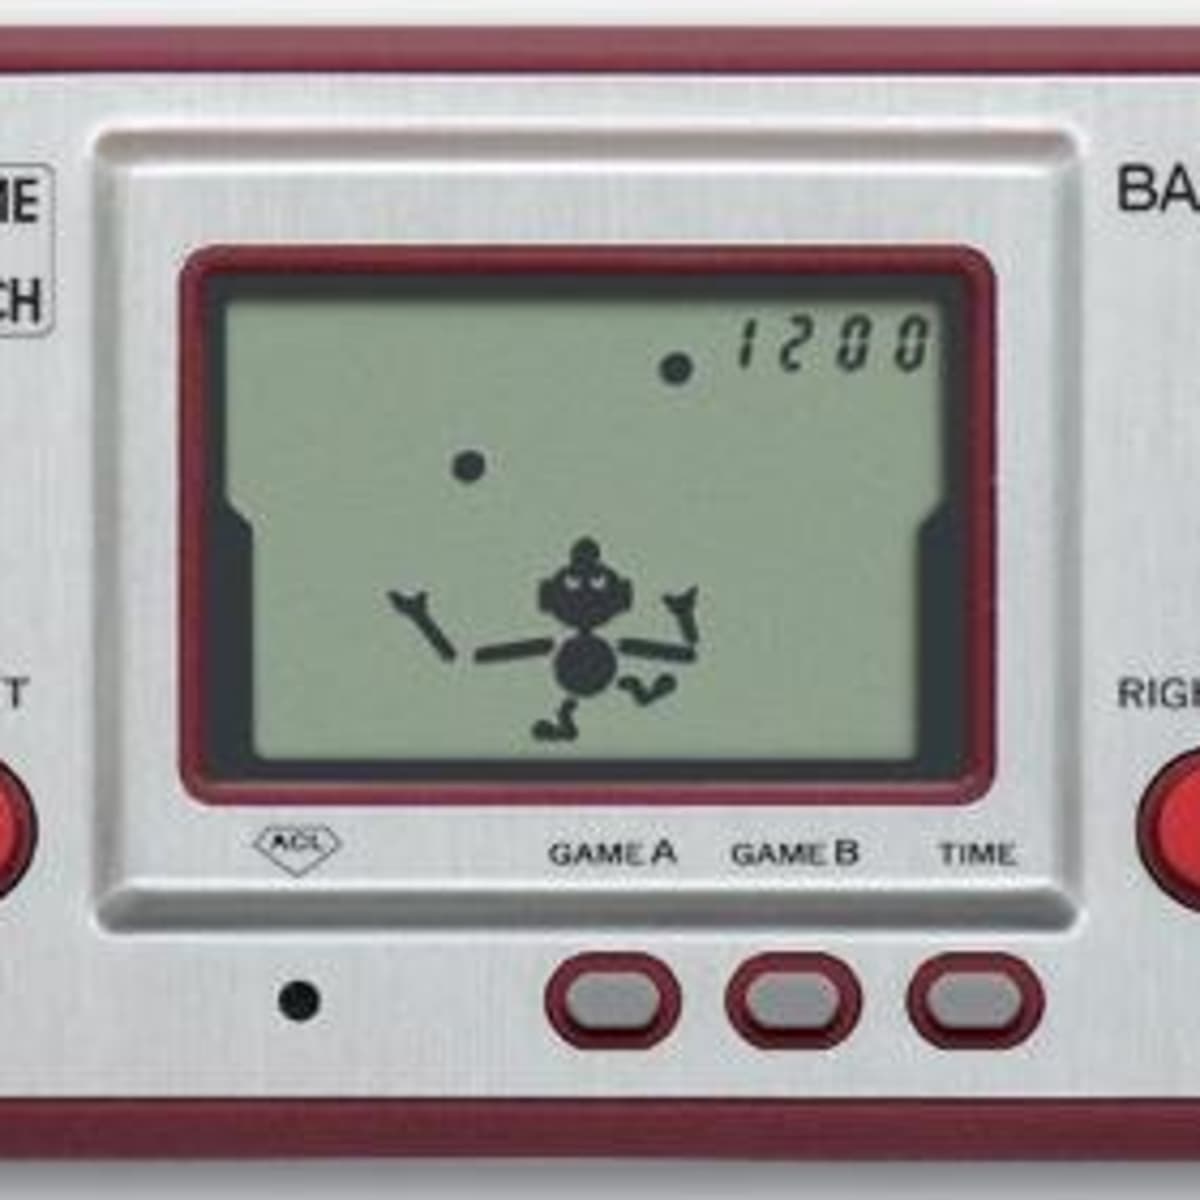 Guide to Nintendo's Game & Watch '80s Retro Handheld Games - LevelSkip